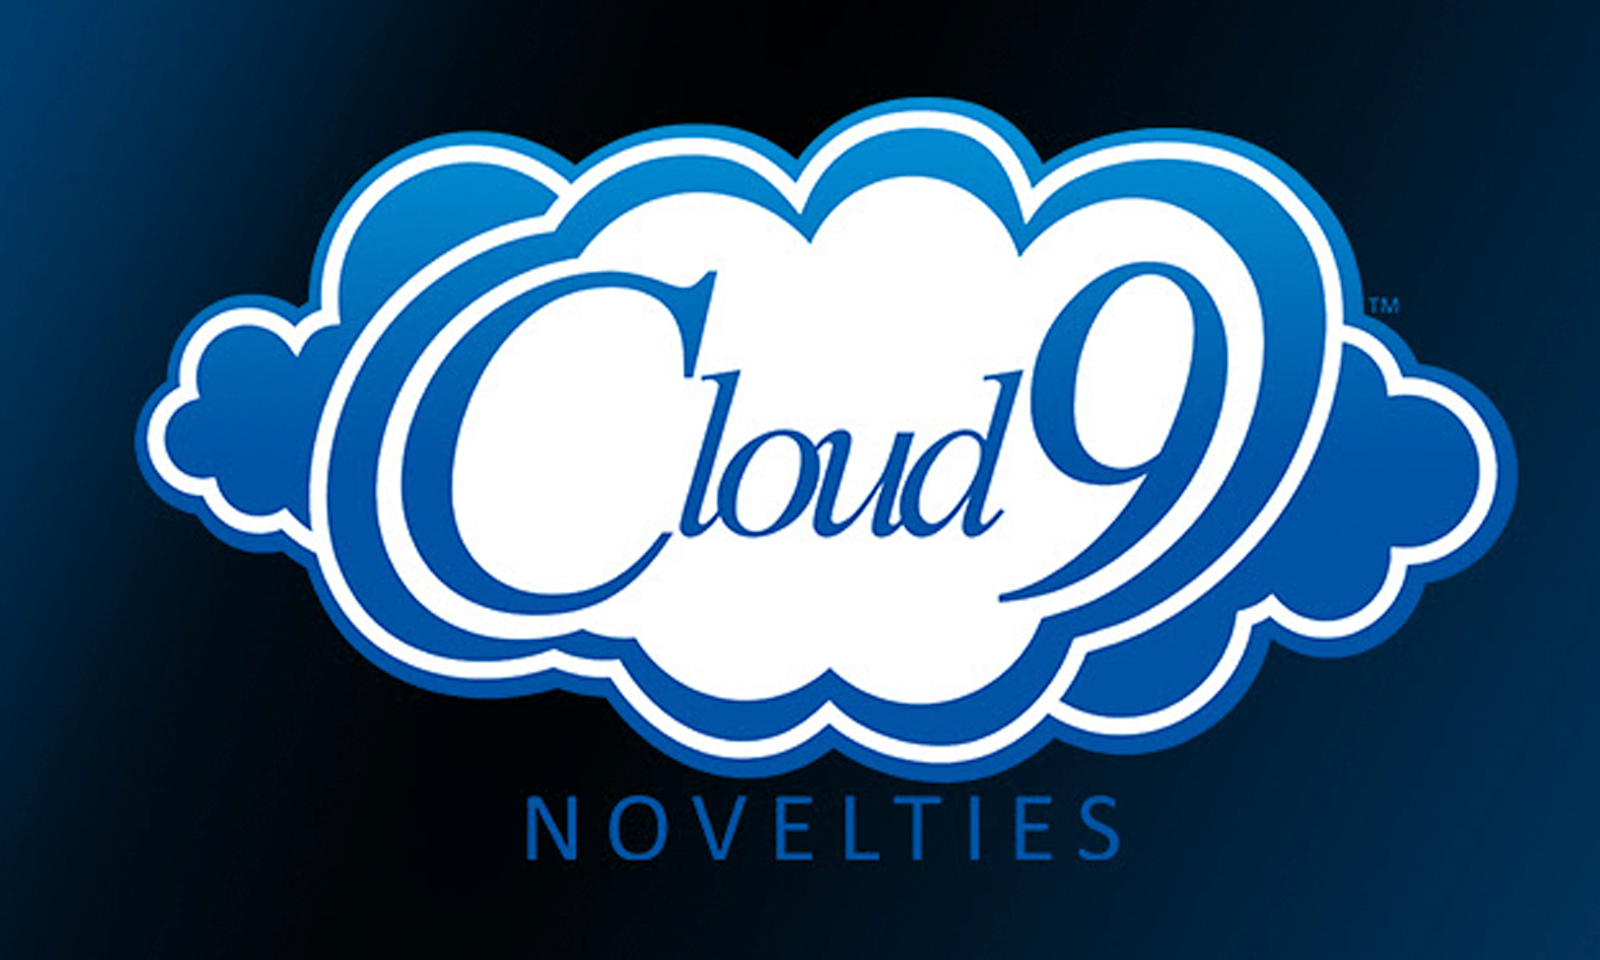 Cloud 9 Novelties at ANME With New Products, Expanded Booth